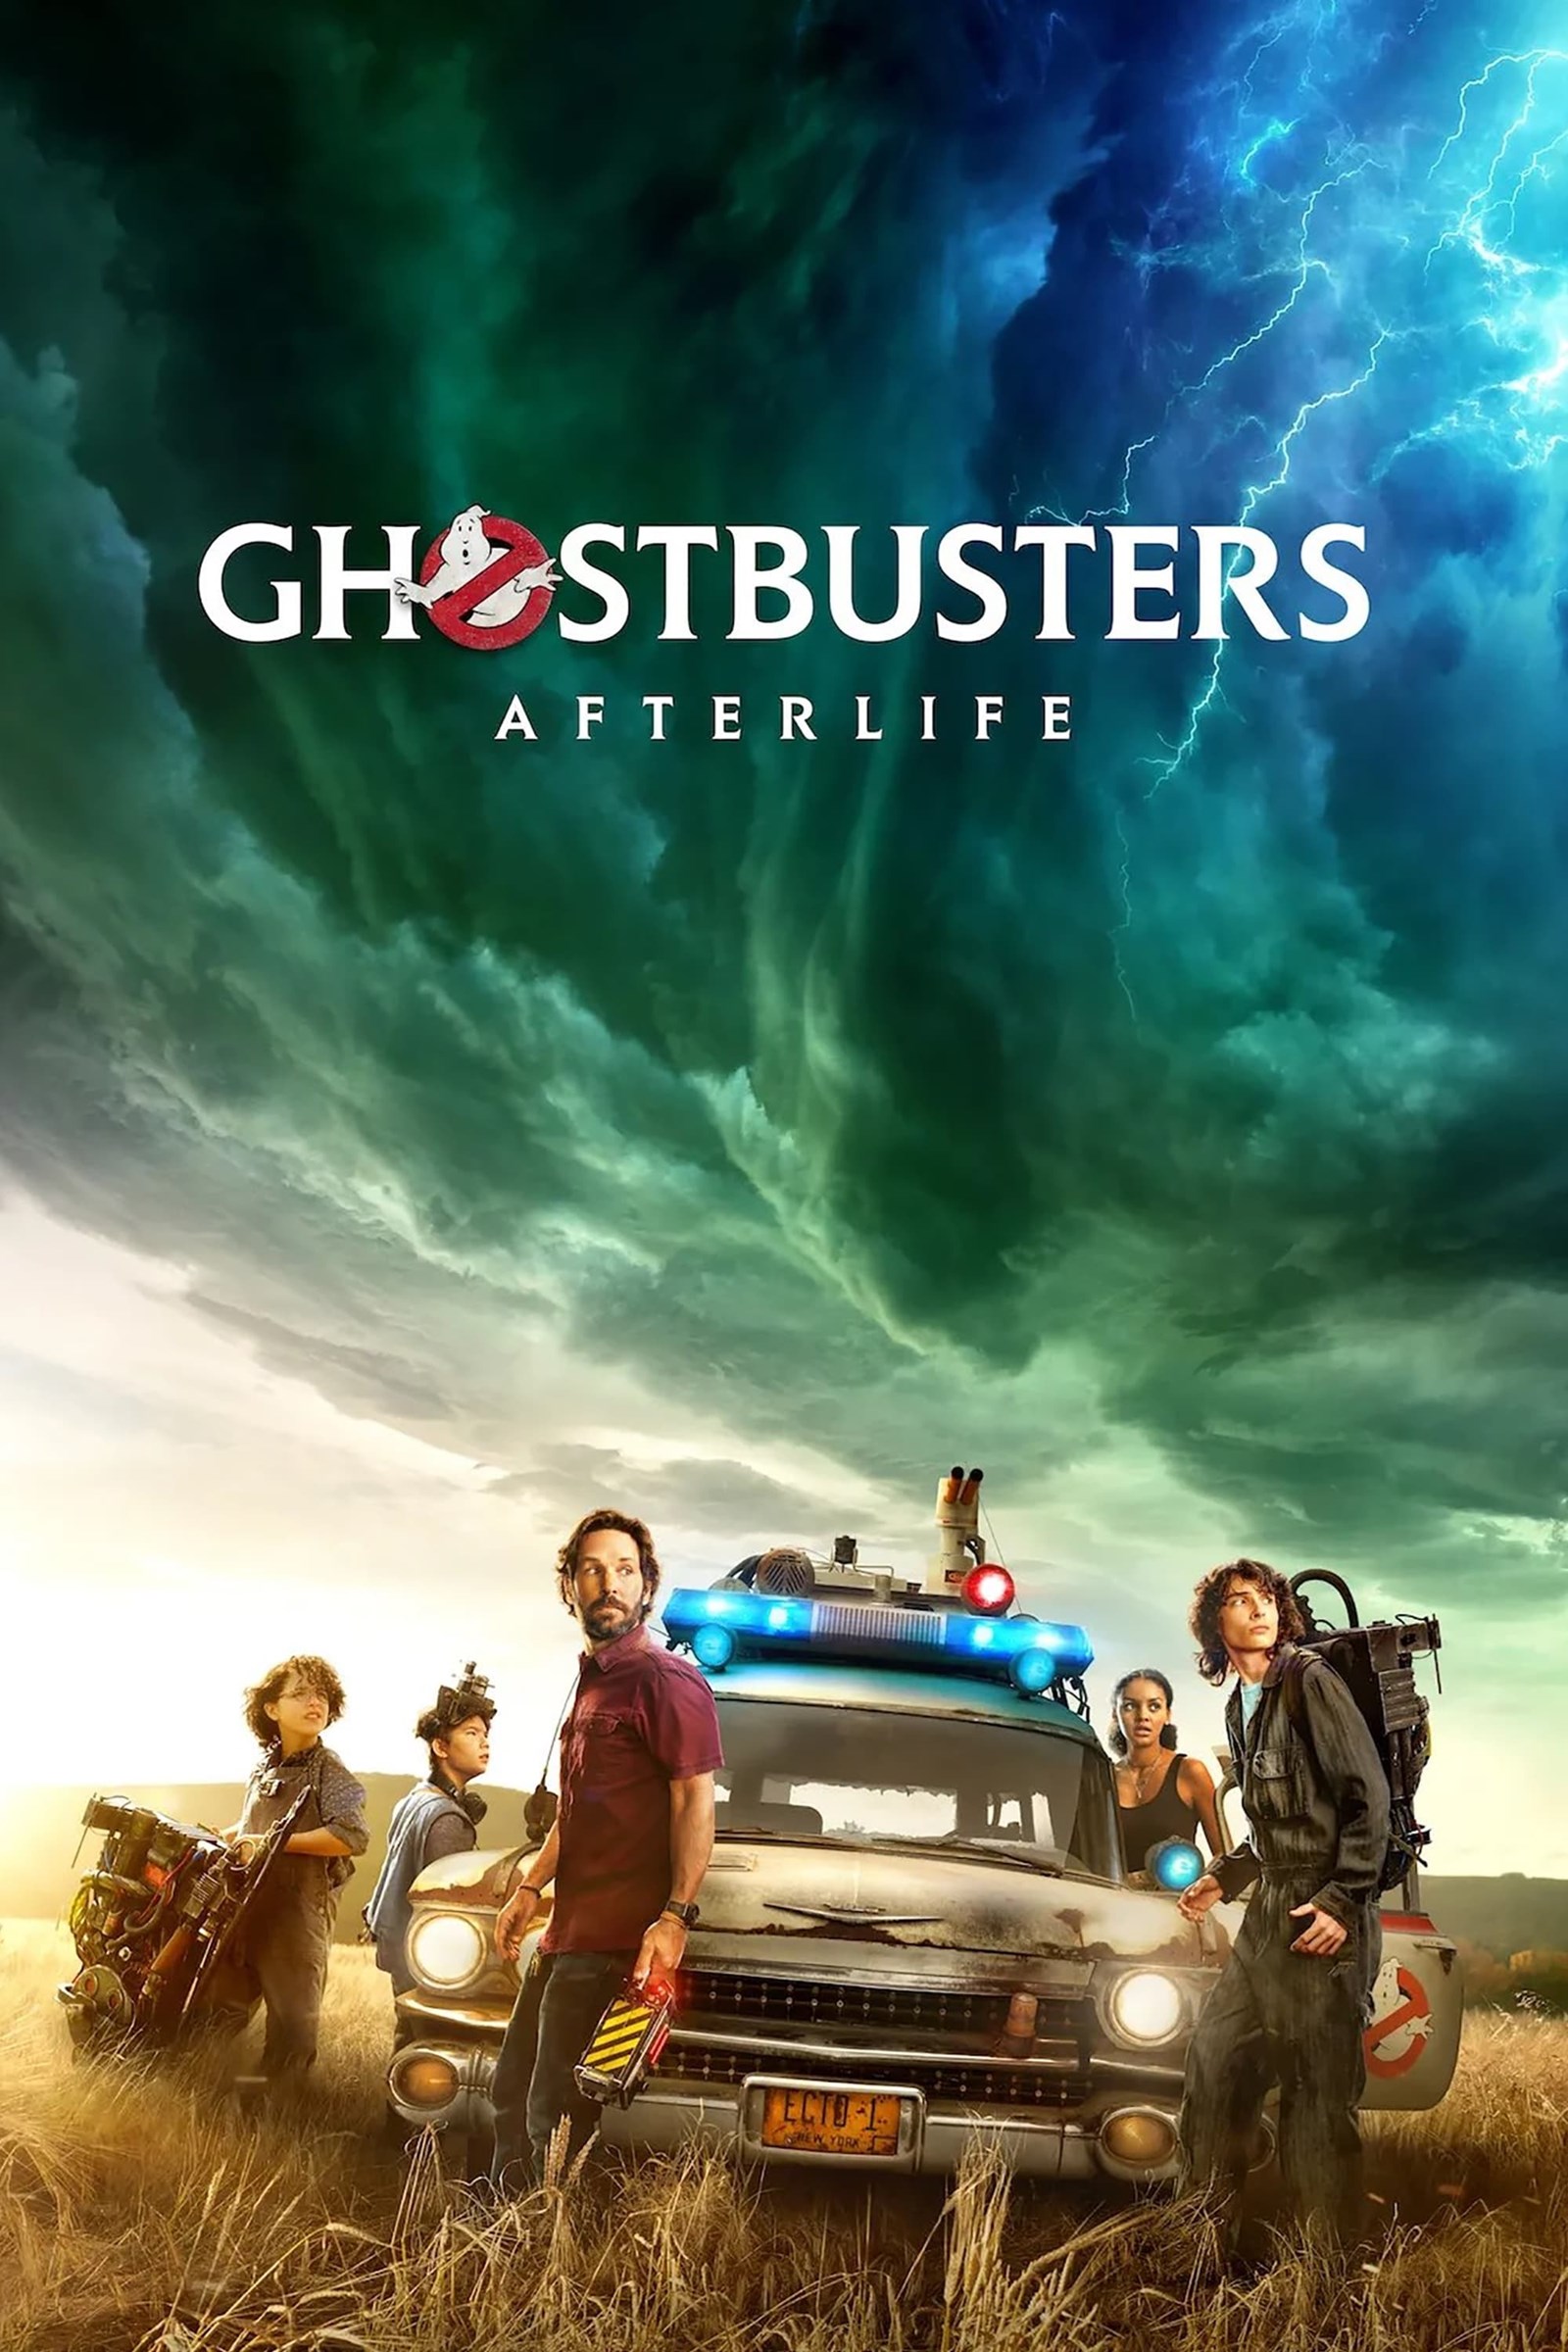 Ghostbusters: afterlife 2021 - 4k quality